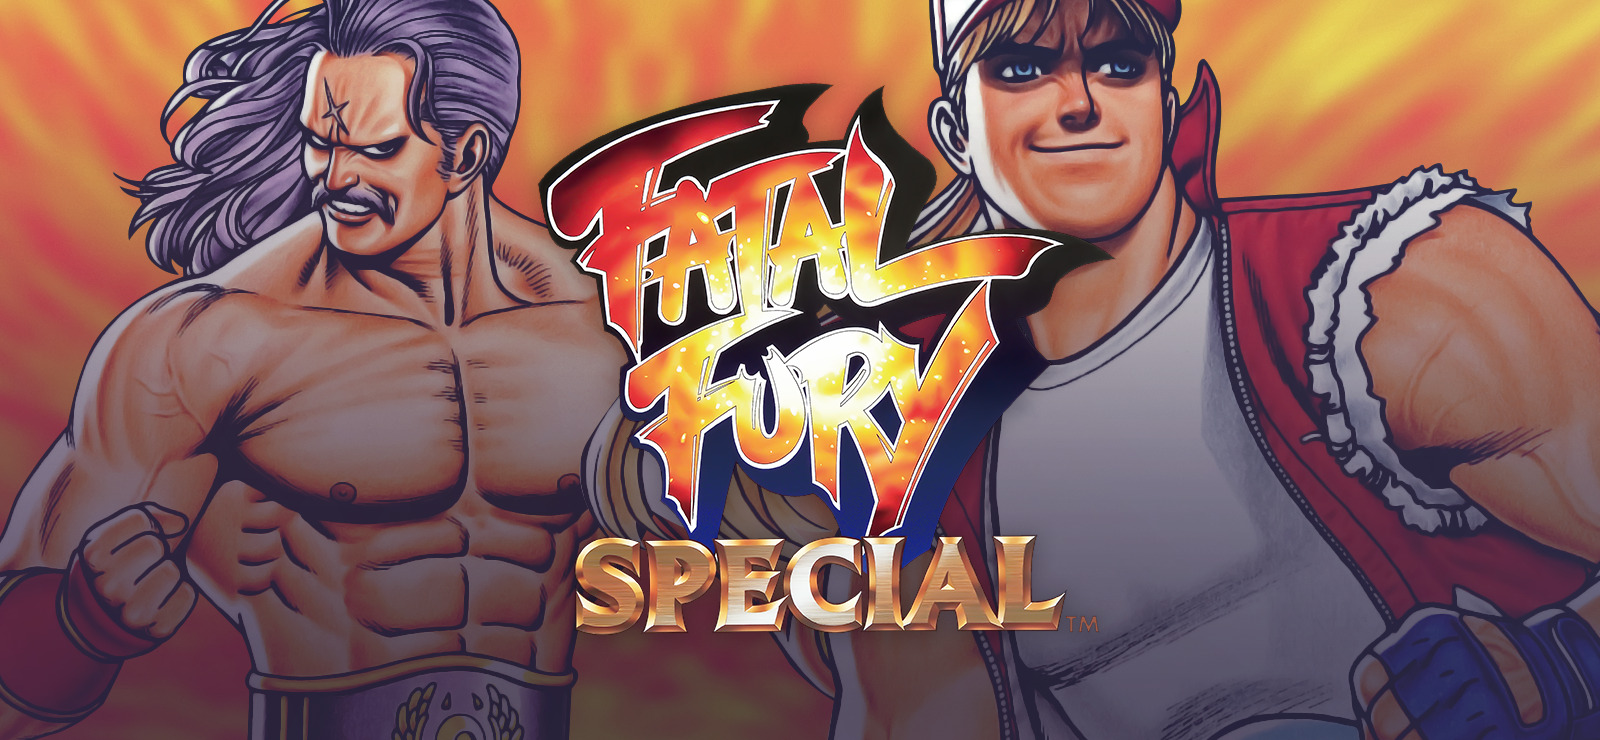 FATAL FURY SPECIAL by SNK CORPORATION